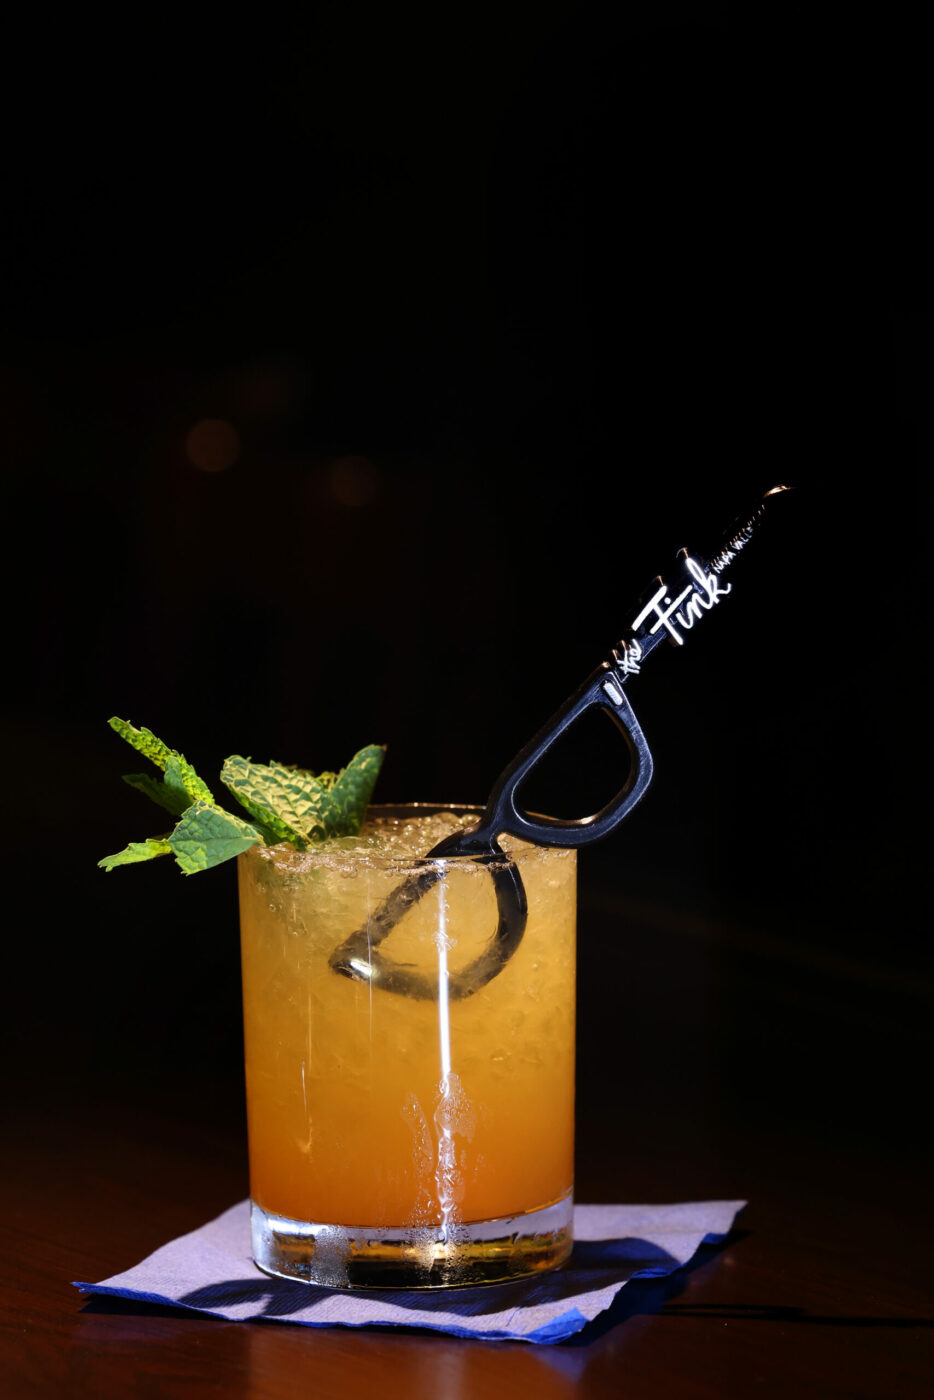 The cocktail Iuka's Grog includes dark Jamaican rum, Demerara rum, lime, pineapple and passionfruit juices, and a signature "The Fink" swizzle stick at The Fink, a new craft cocktail bar with the theme of an old boathouse in Napa, Wednesday, July 26, 2023. (Beth Schlanker / The Press Democrat)